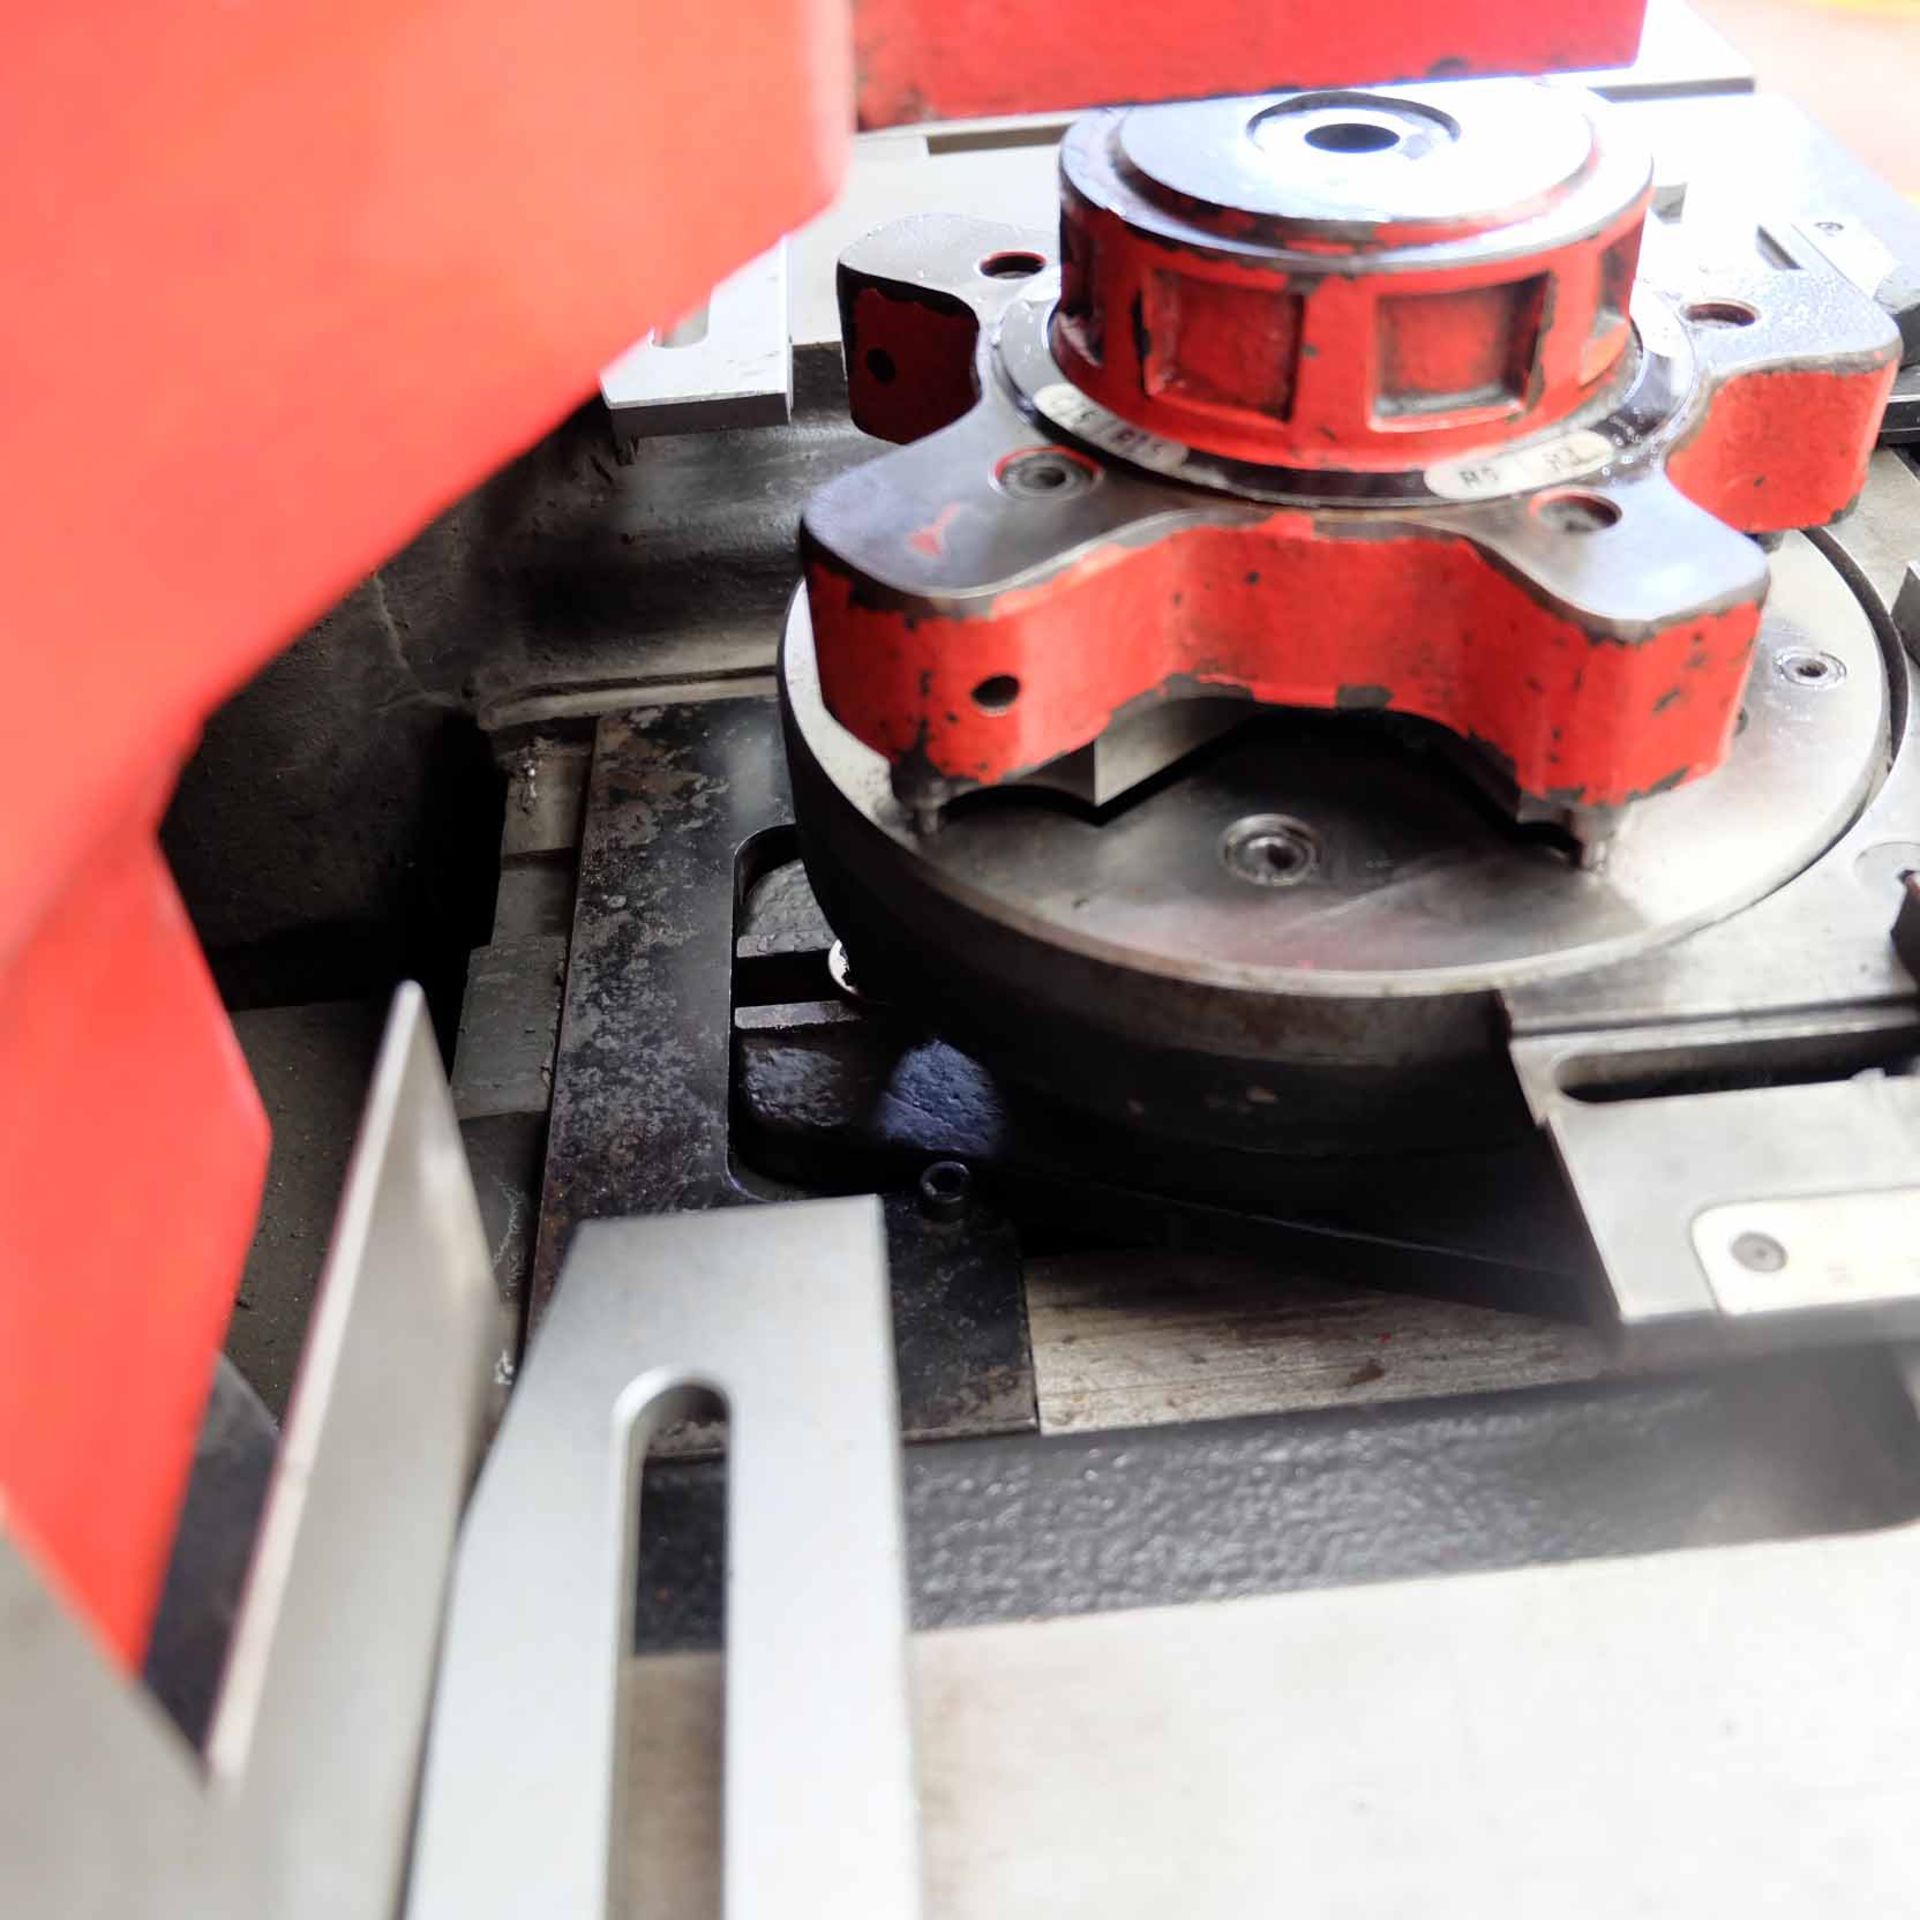 Amada CSHW-220 Double Sided Hydraulic Corner Notcher. With Punch & Cropping Attachments. Capacity 22 - Image 19 of 19